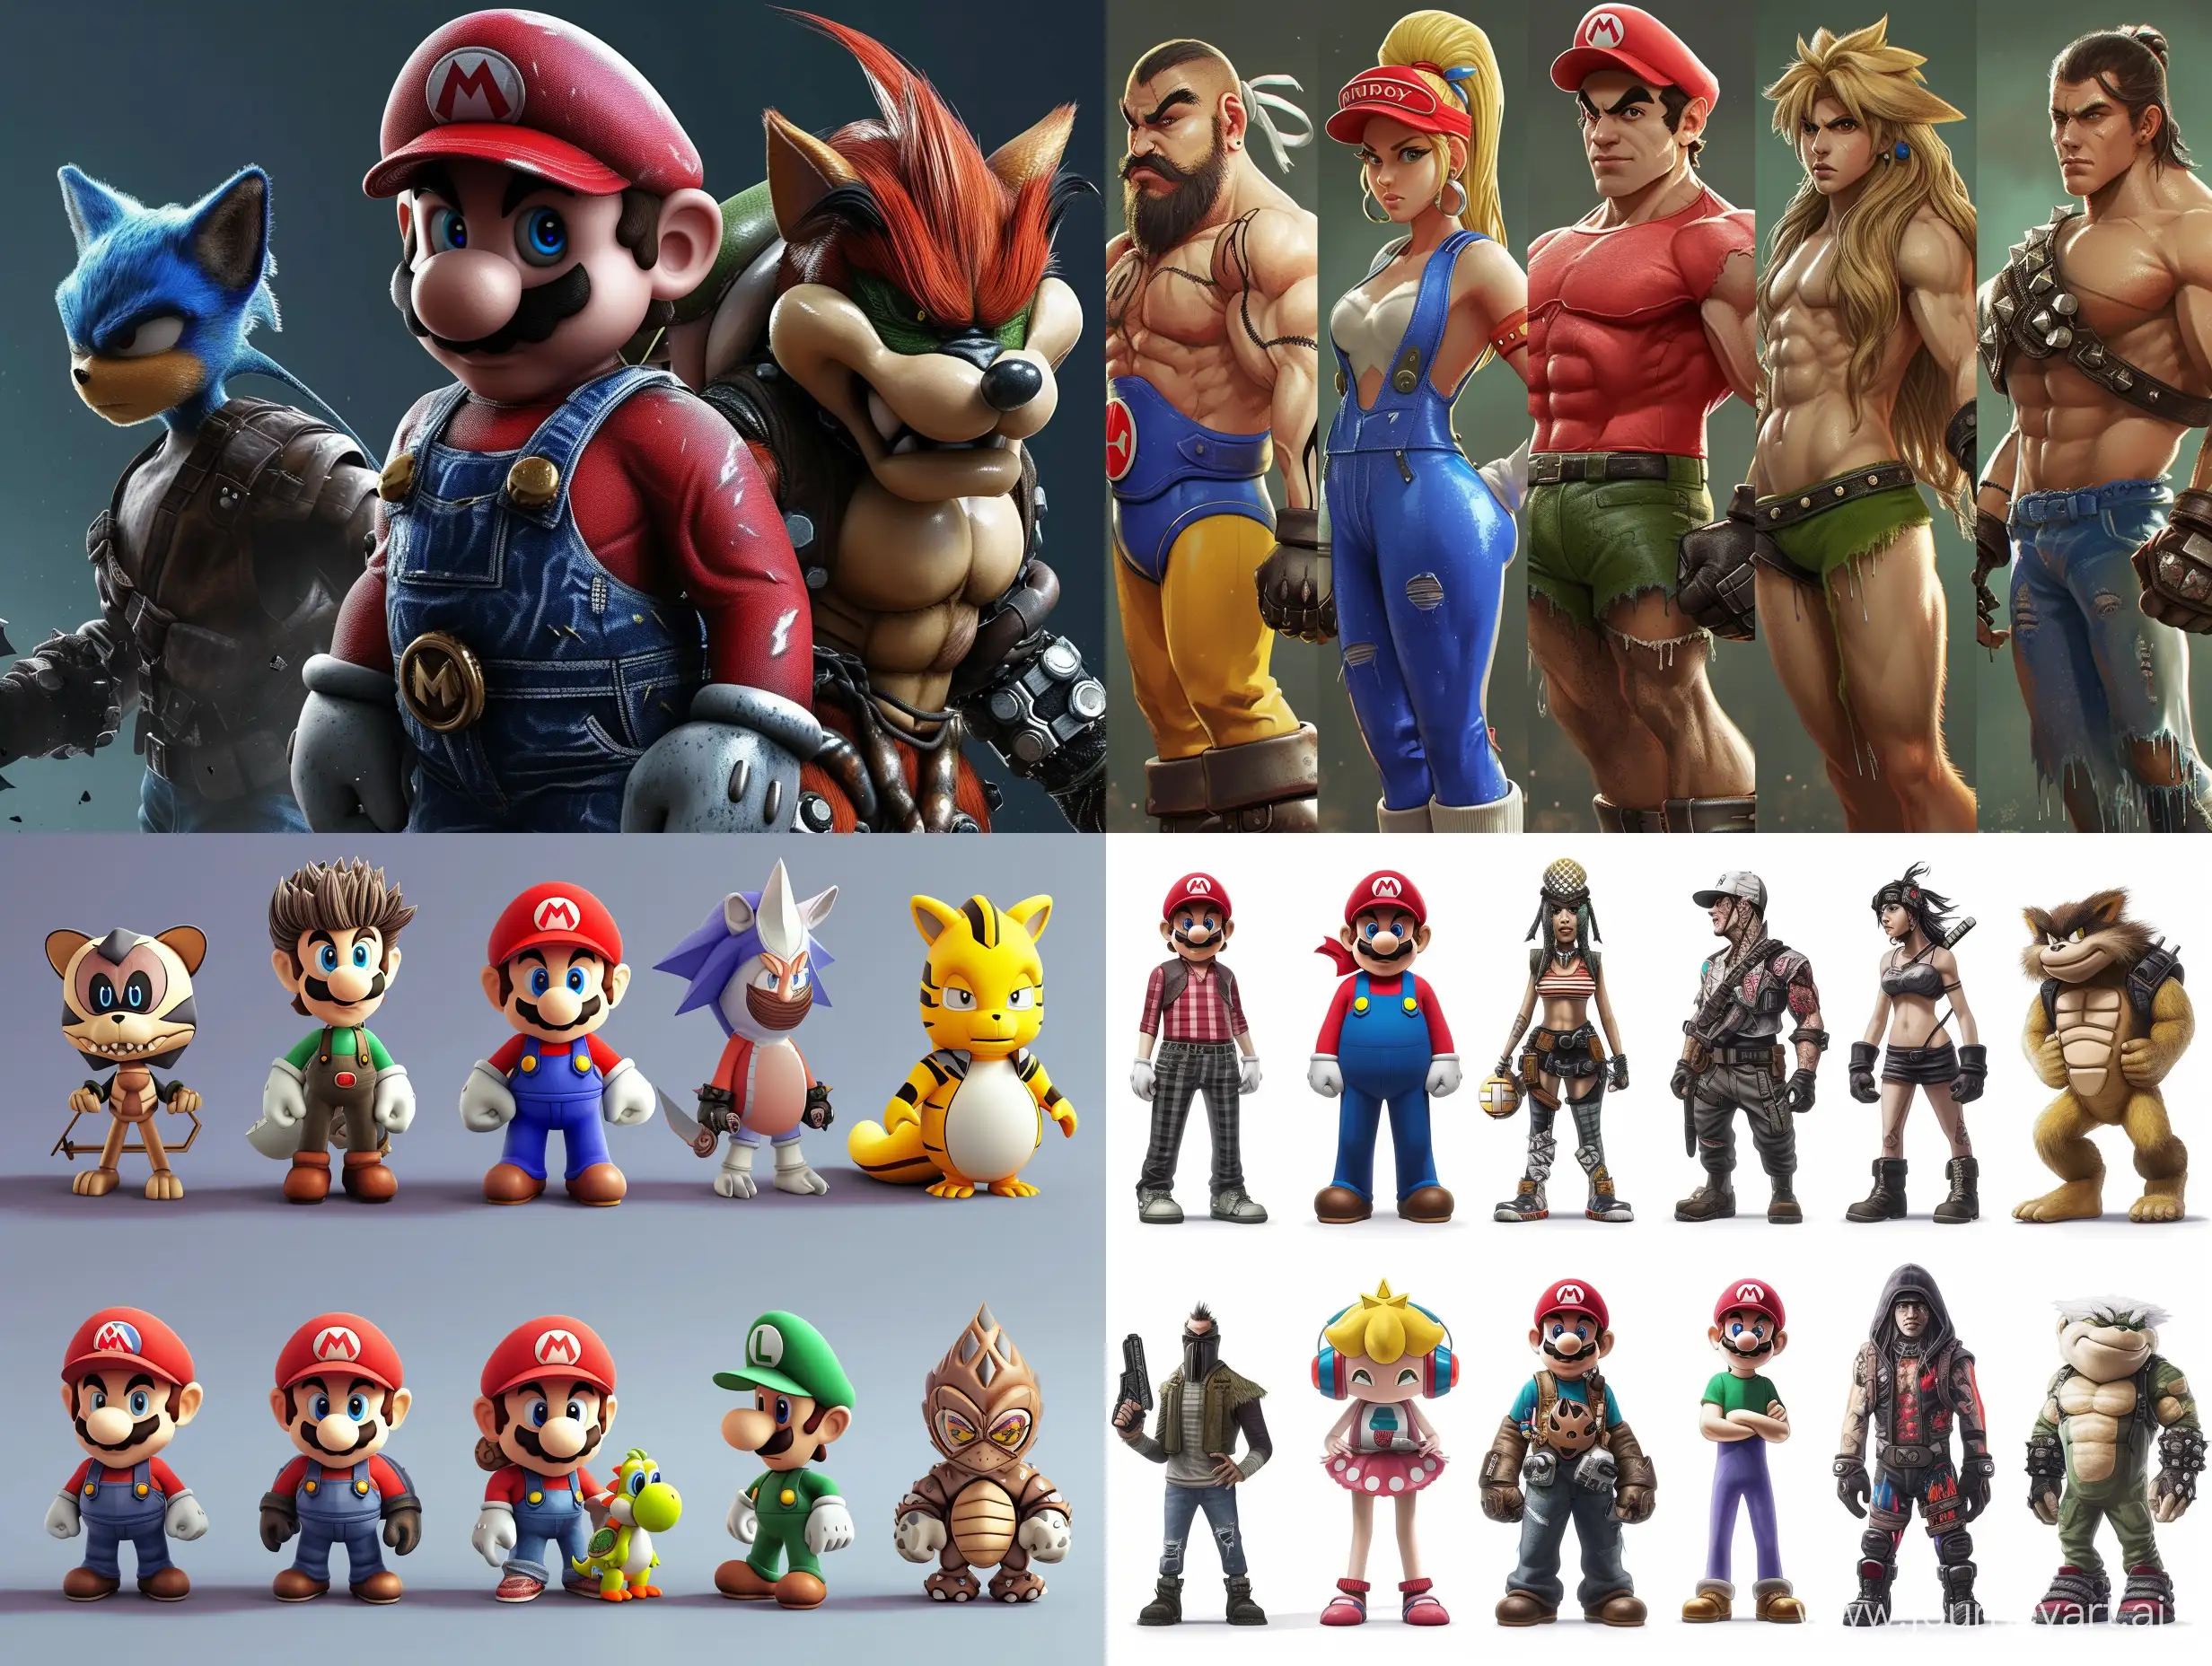 Iconic-Nintendo-Sega-and-Sony-Game-Characters-Collide-in-Vivid-Detail